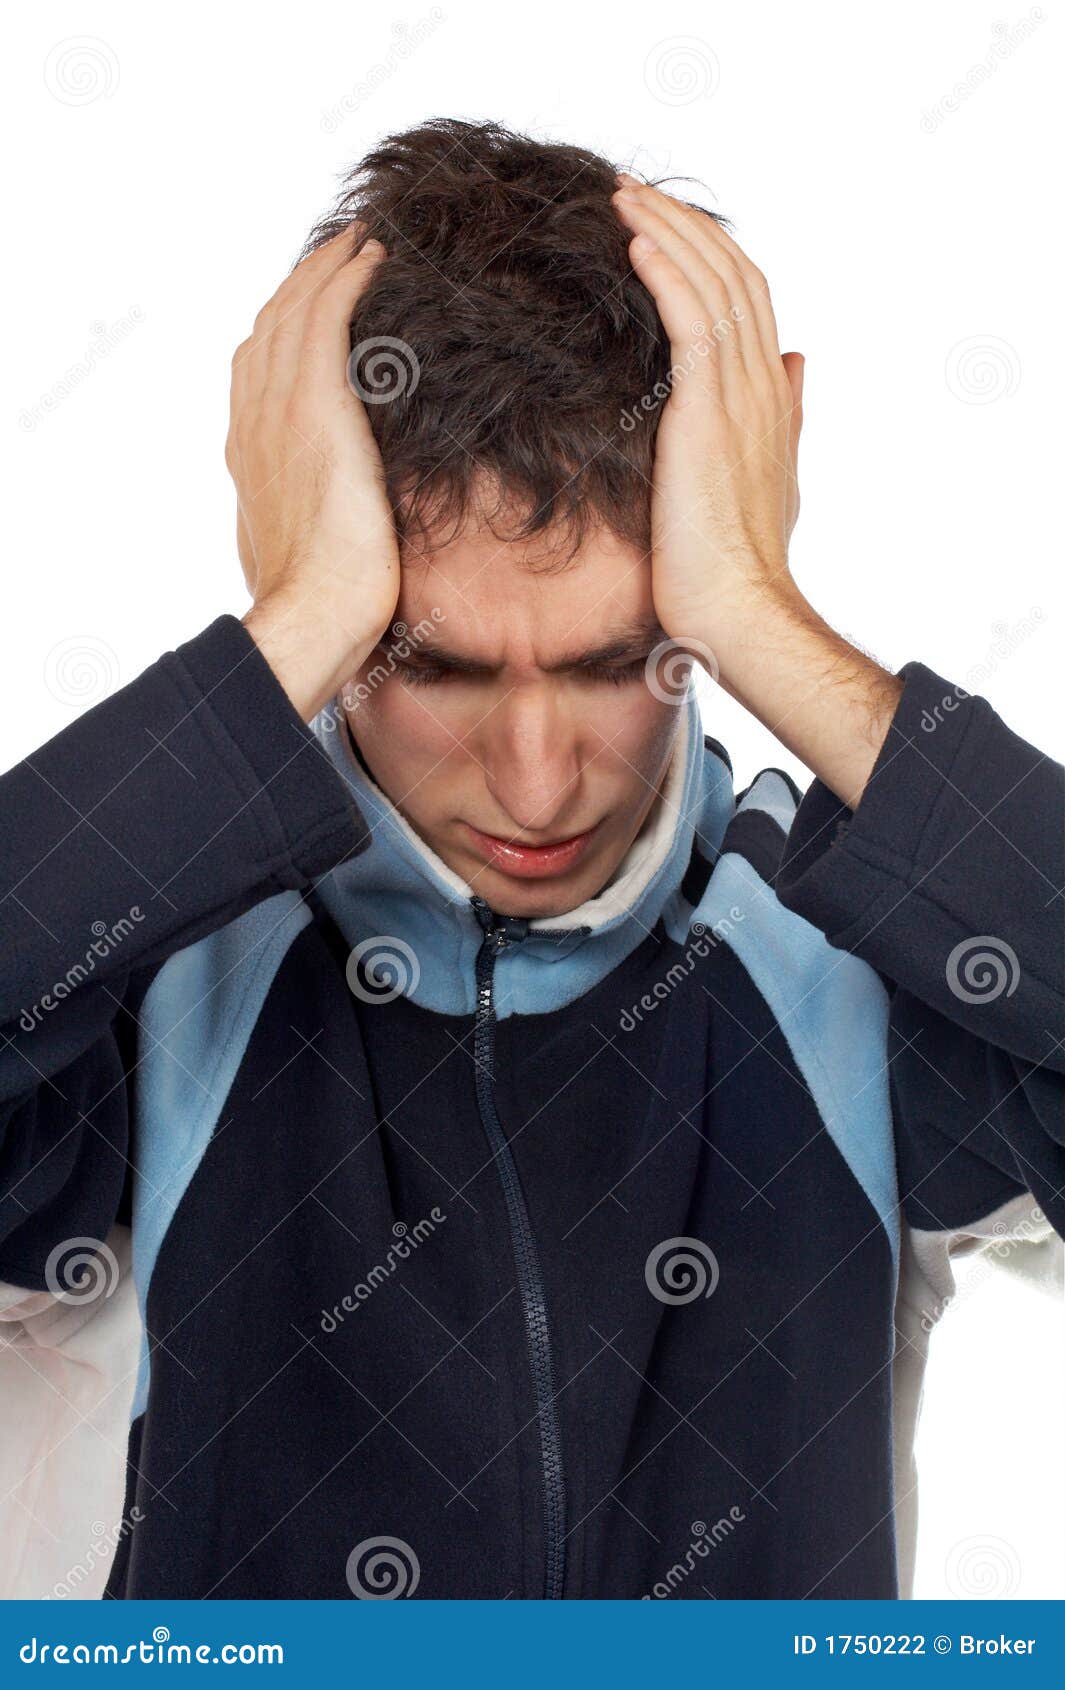 A stressed teenager over a white background